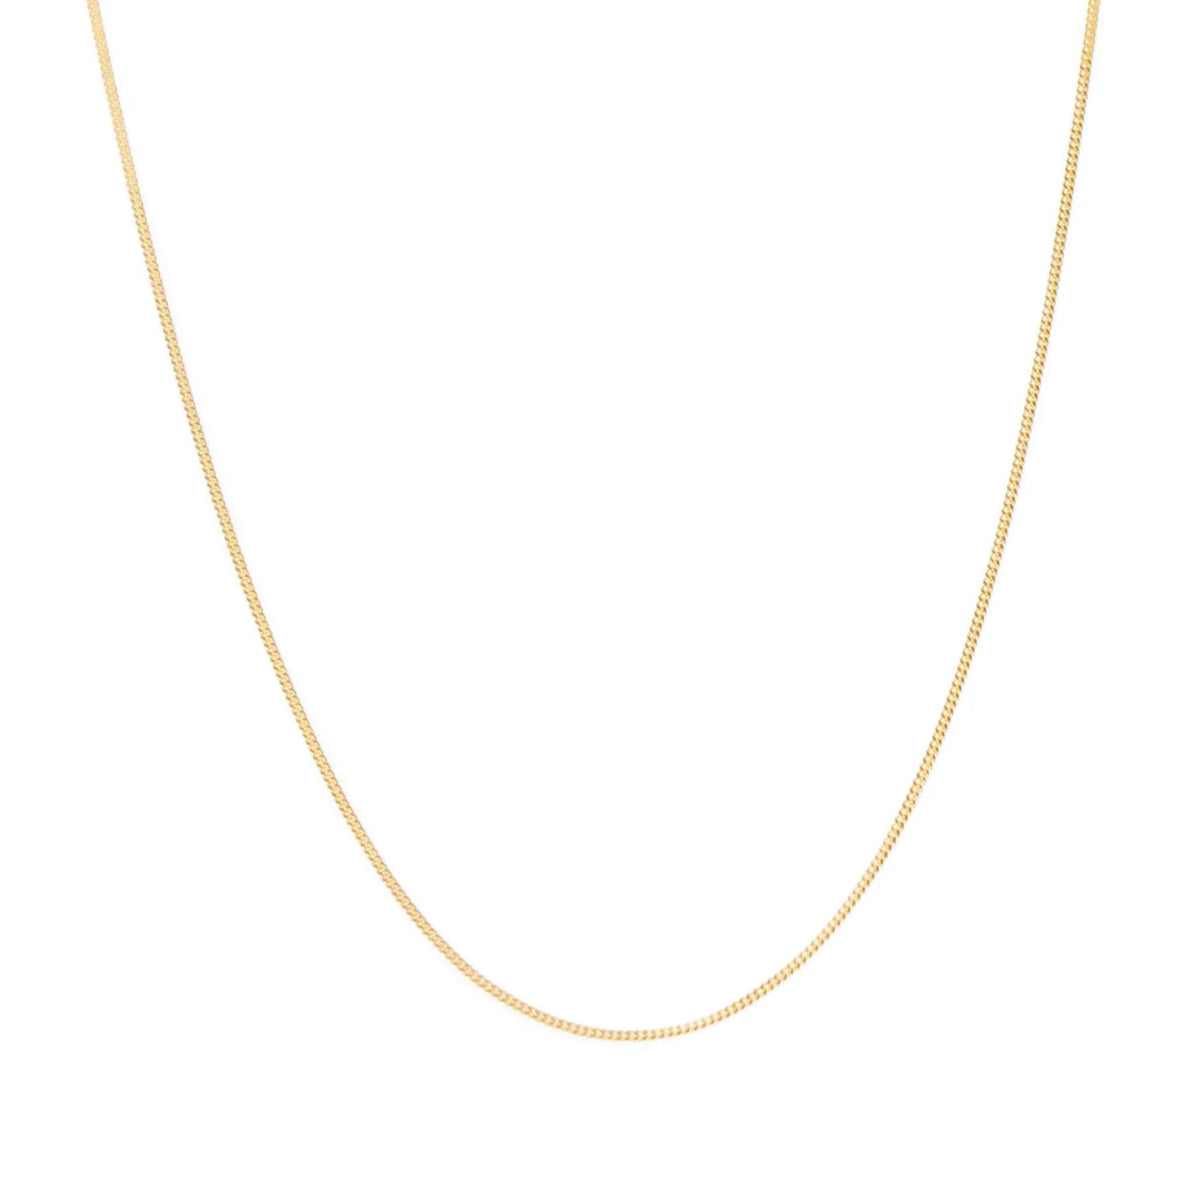 Curb Chain Necklace, 10K, 3 Lengths